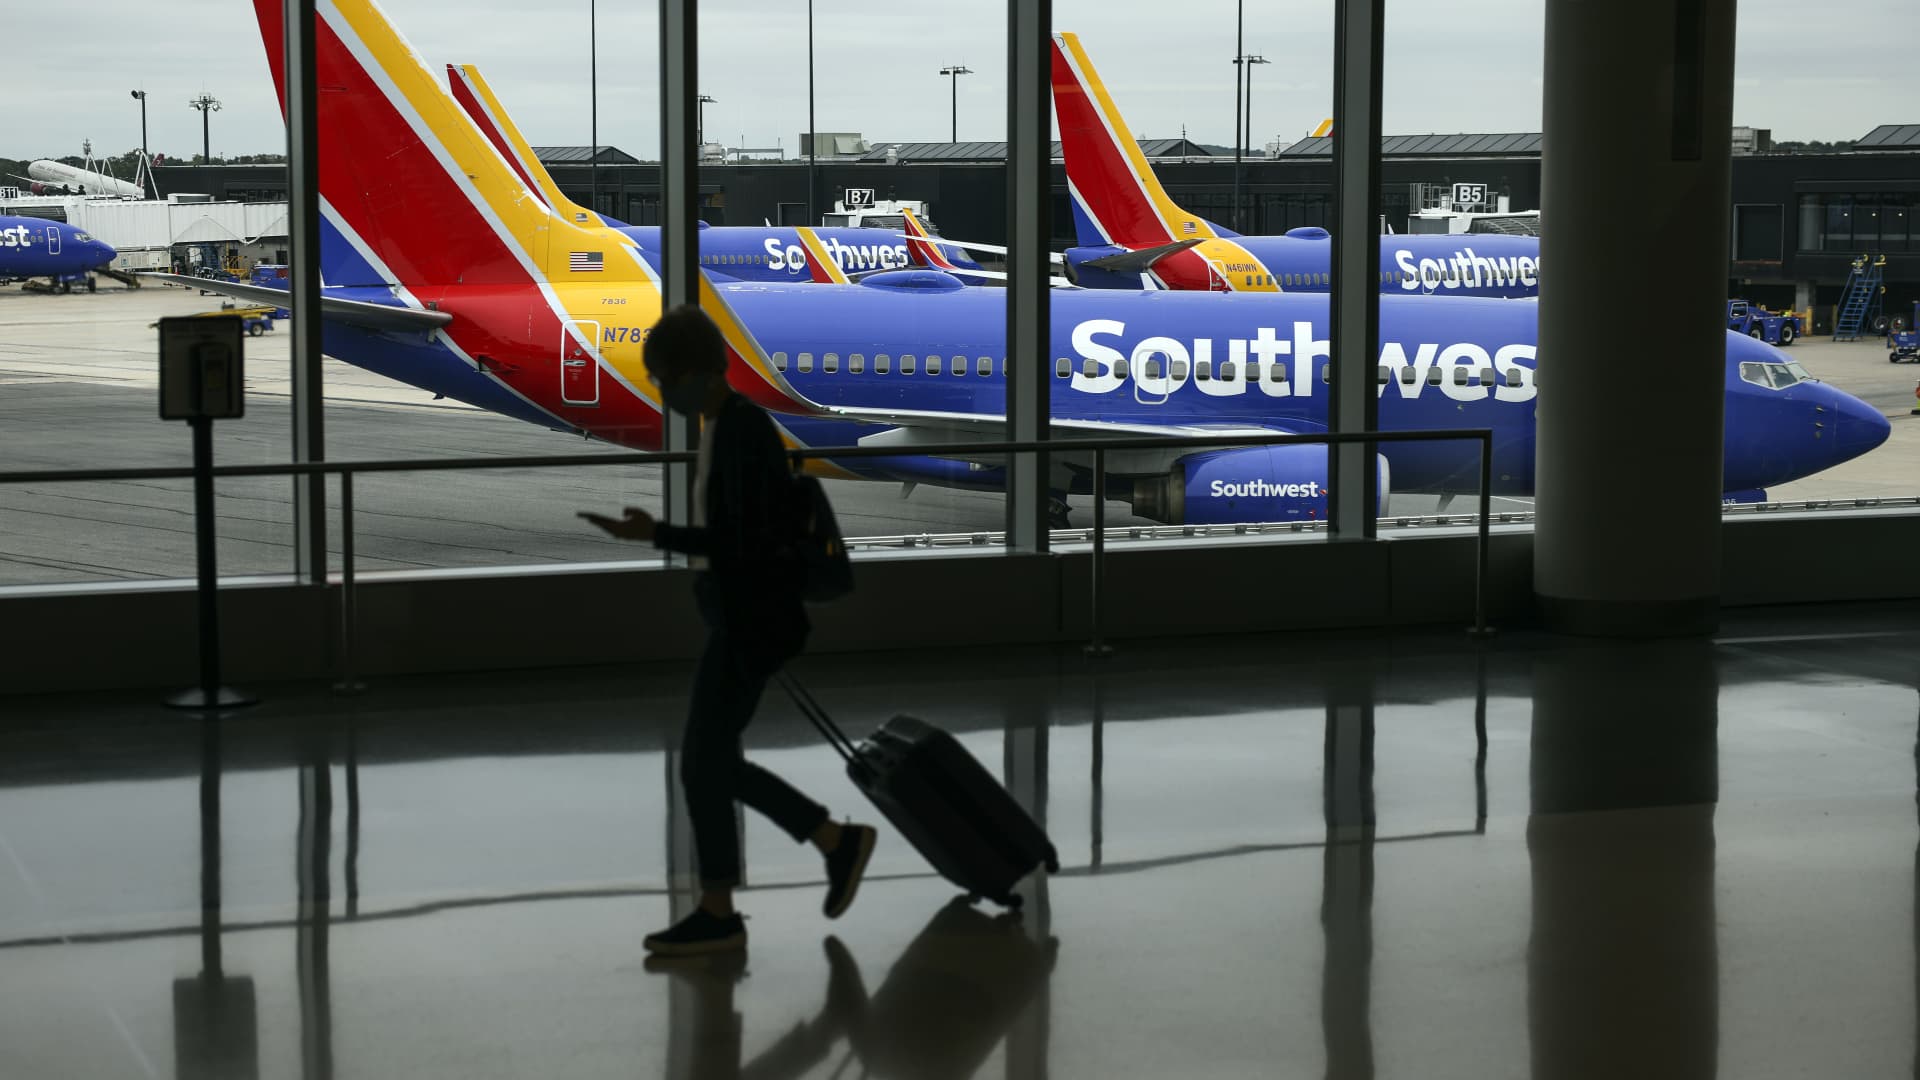 Southwest Airlines customer service goes fully remote, reservations centers close